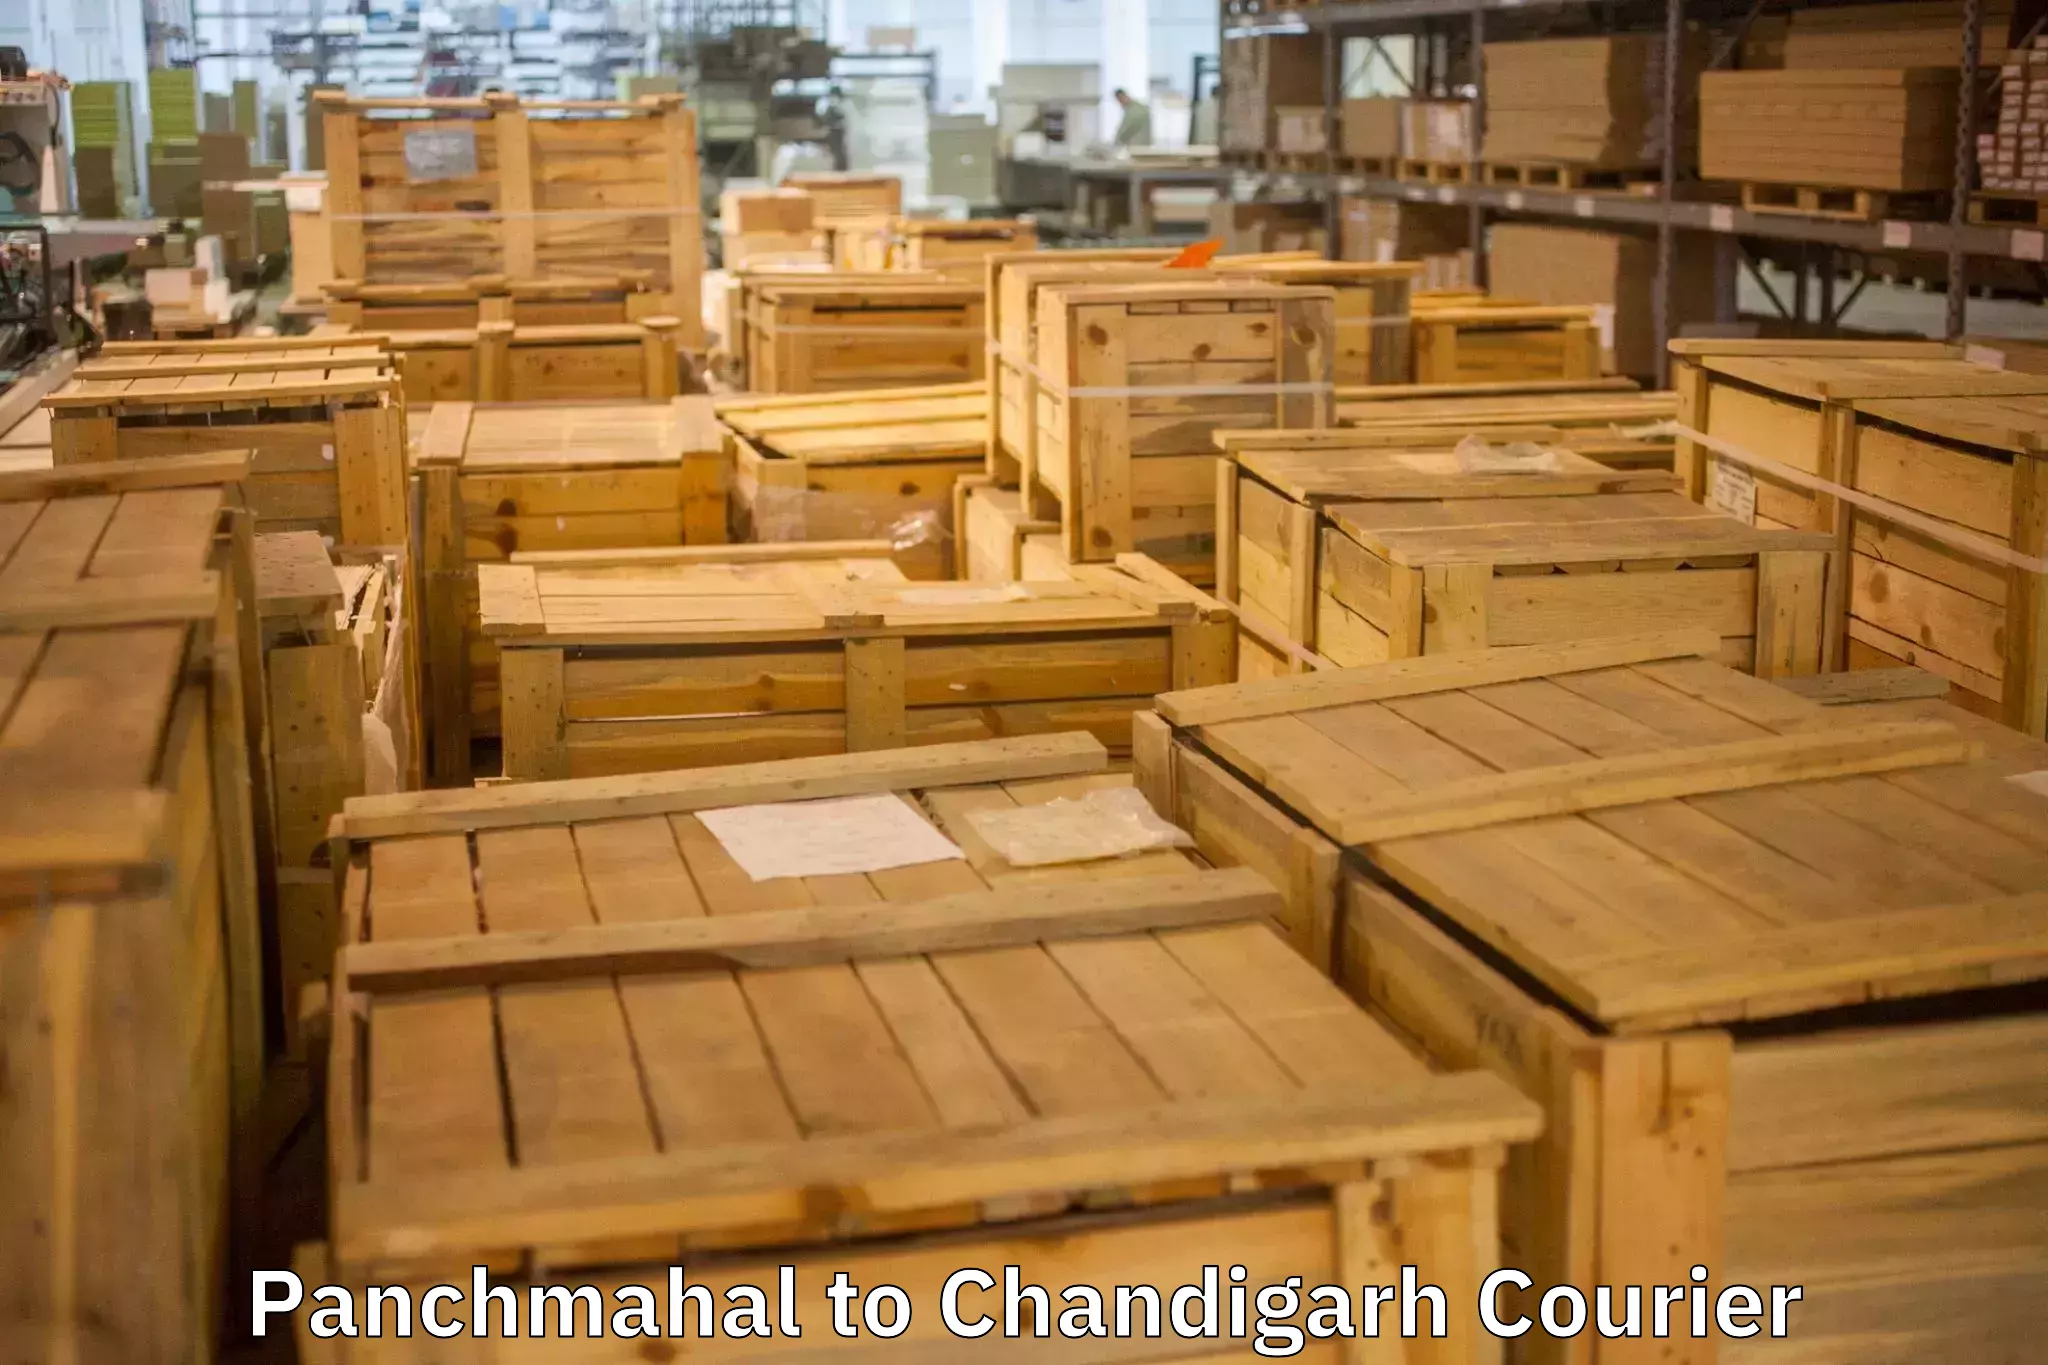 Moving and handling services Panchmahal to Chandigarh